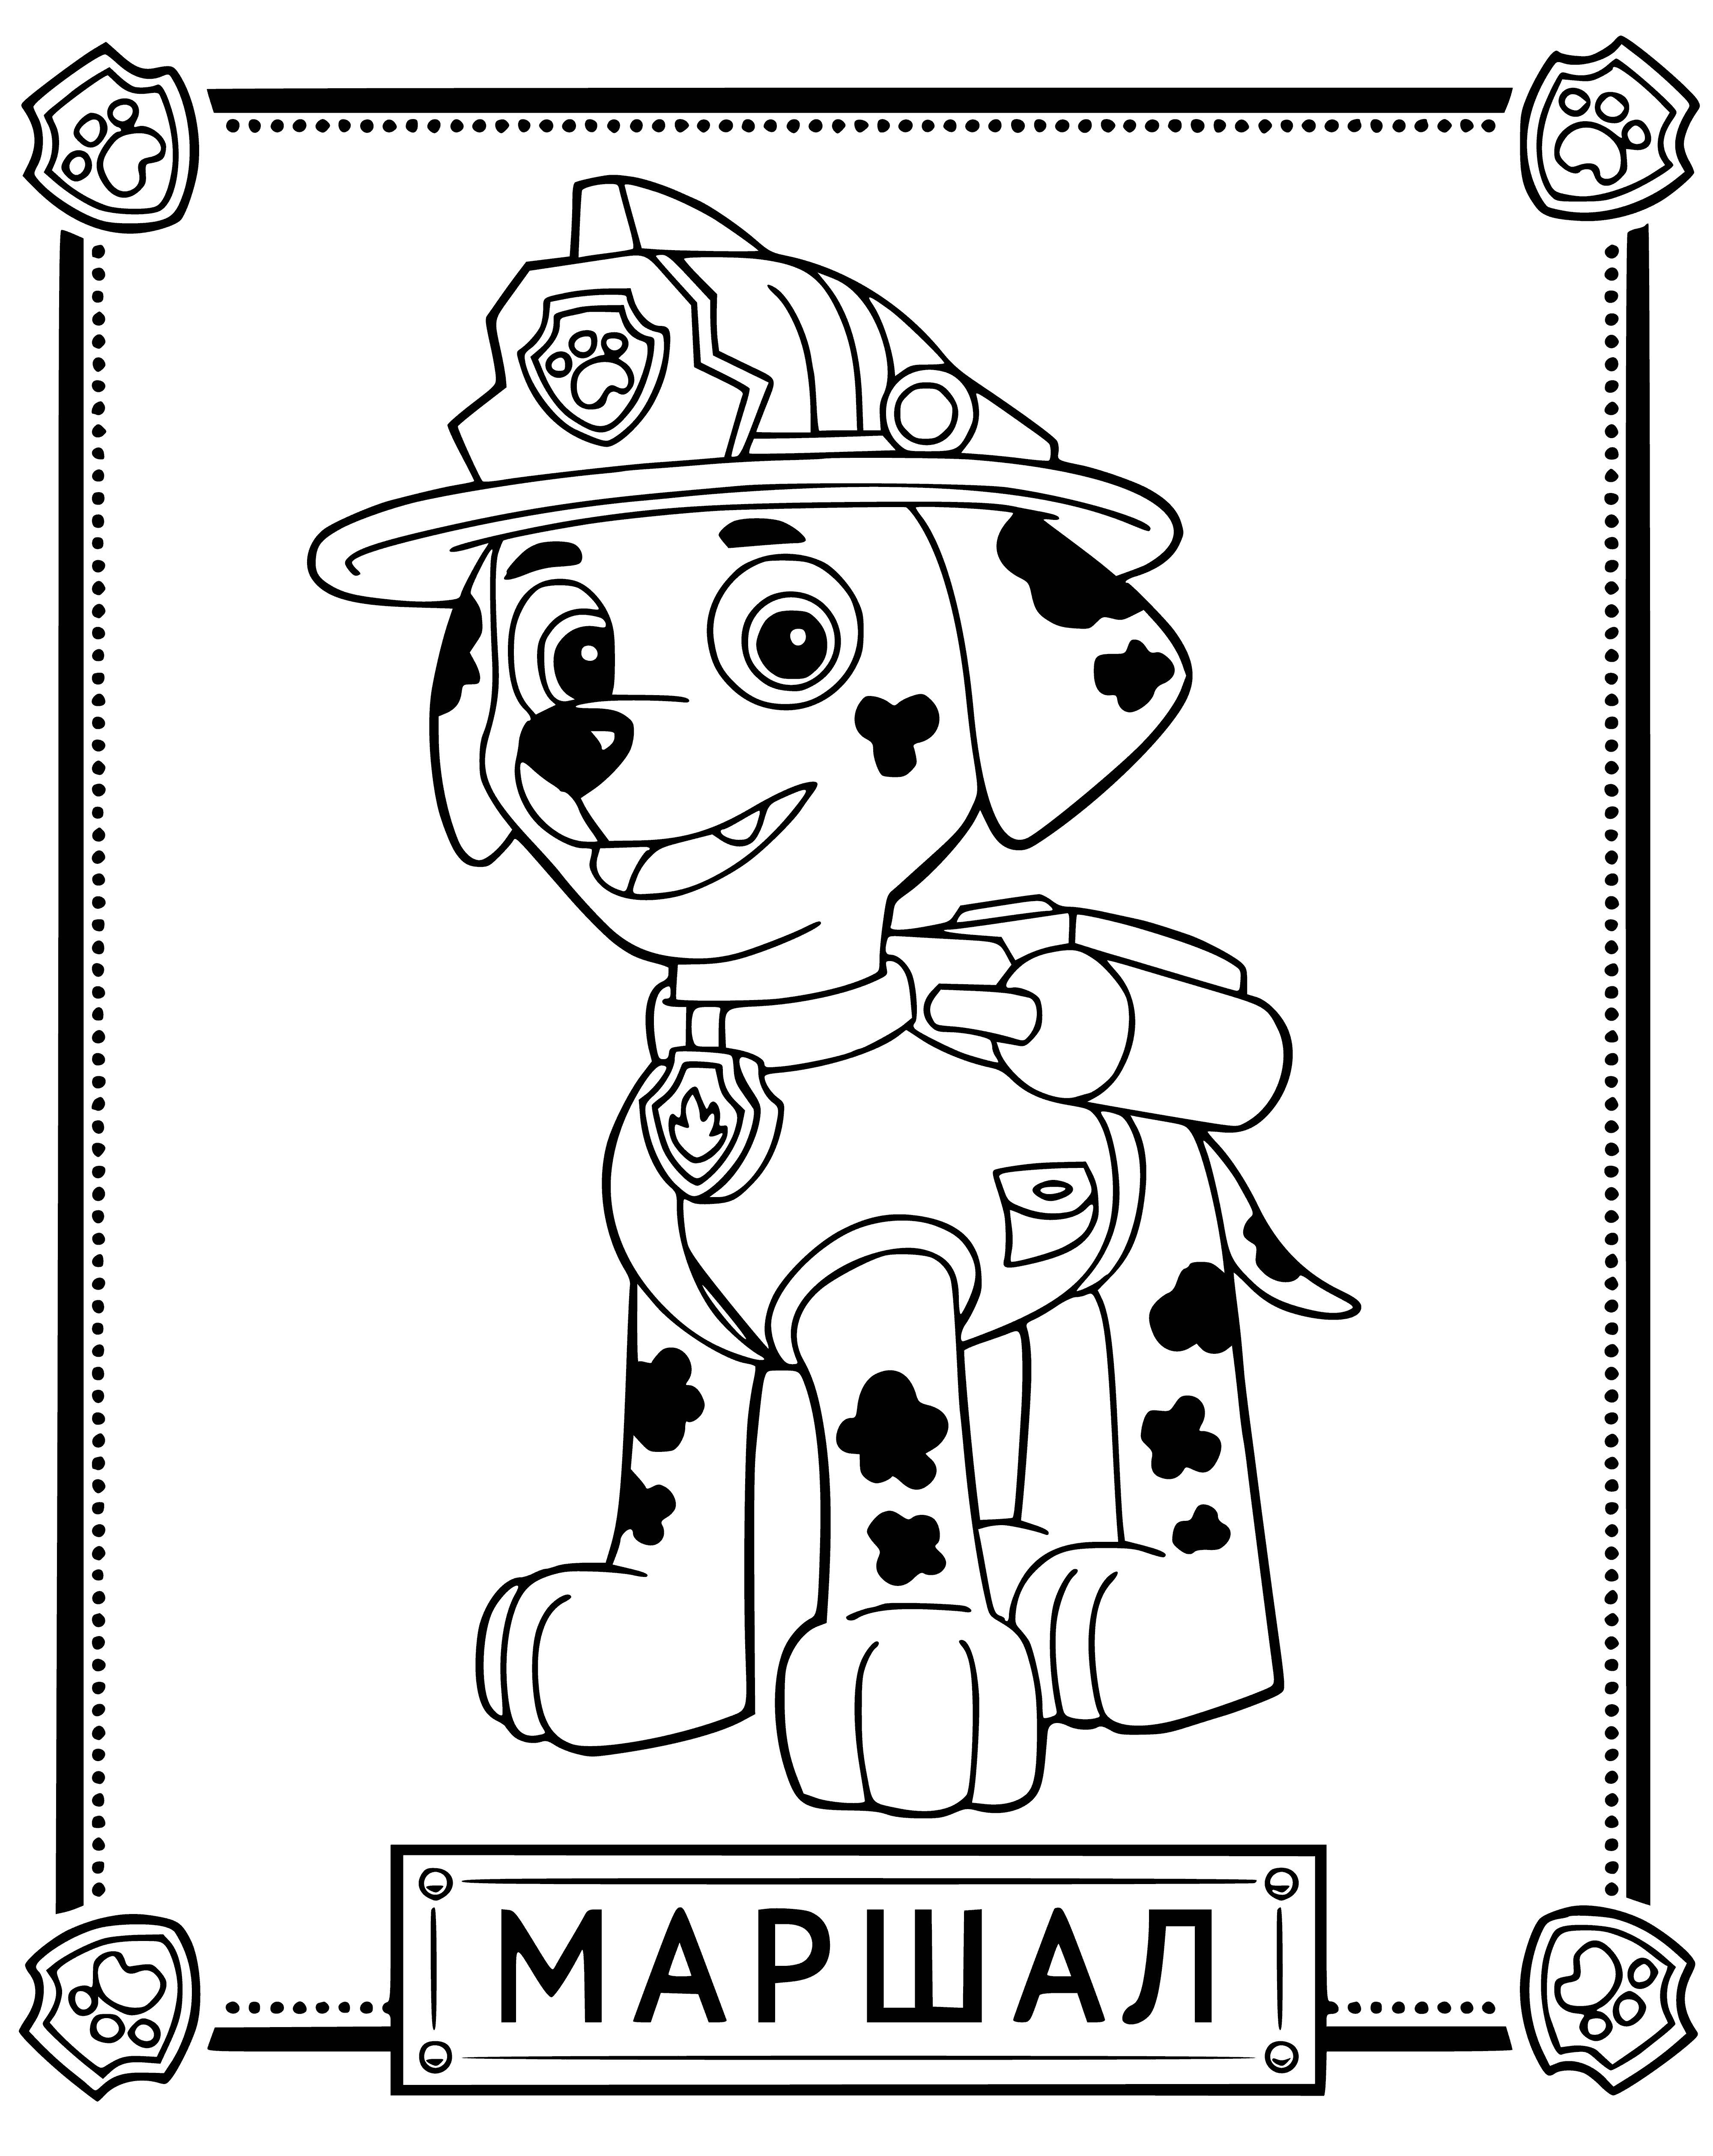 coloring page: Marshal is a Dalmatian fire pup ready to help friends put out fires & save lives. He wears a firefighter's uniform & has a hose to fight blazes.